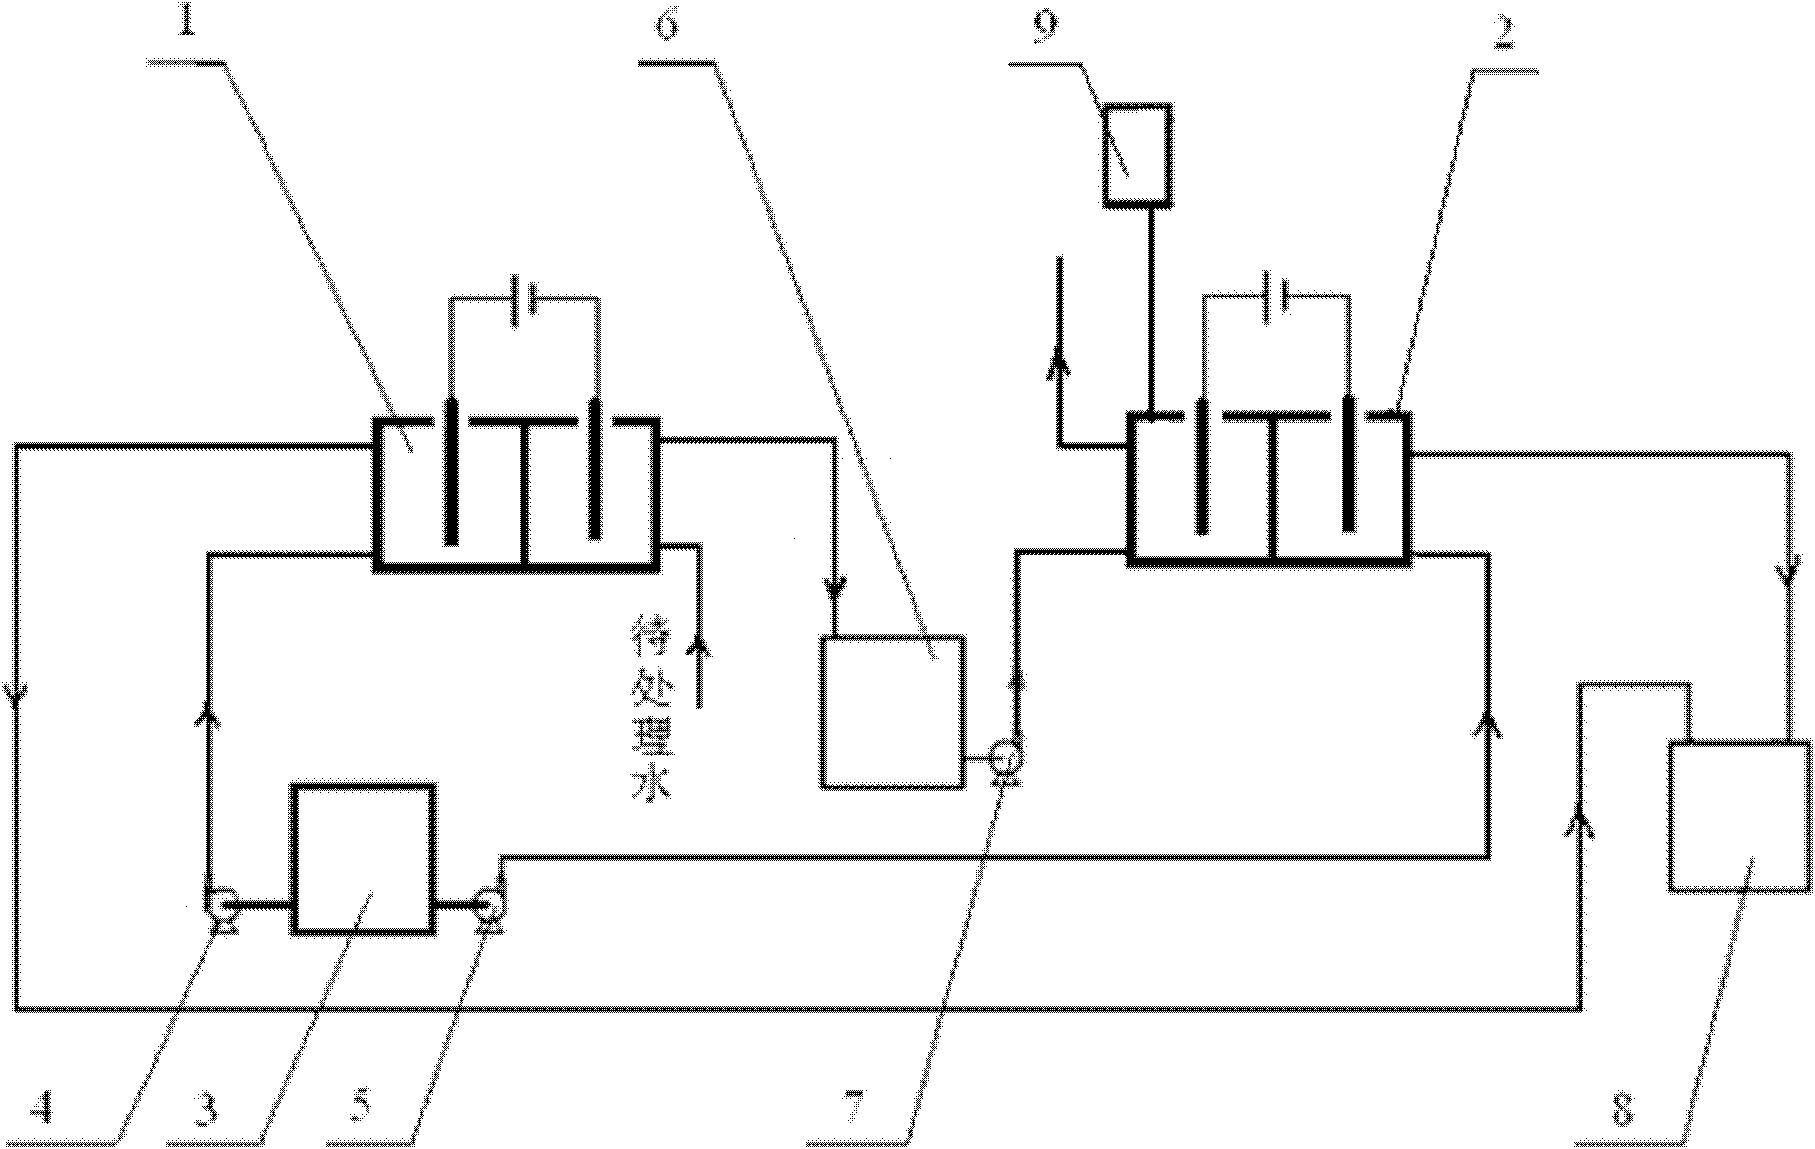 Series electrolytic cell system and its method for removing bromate in drinking water